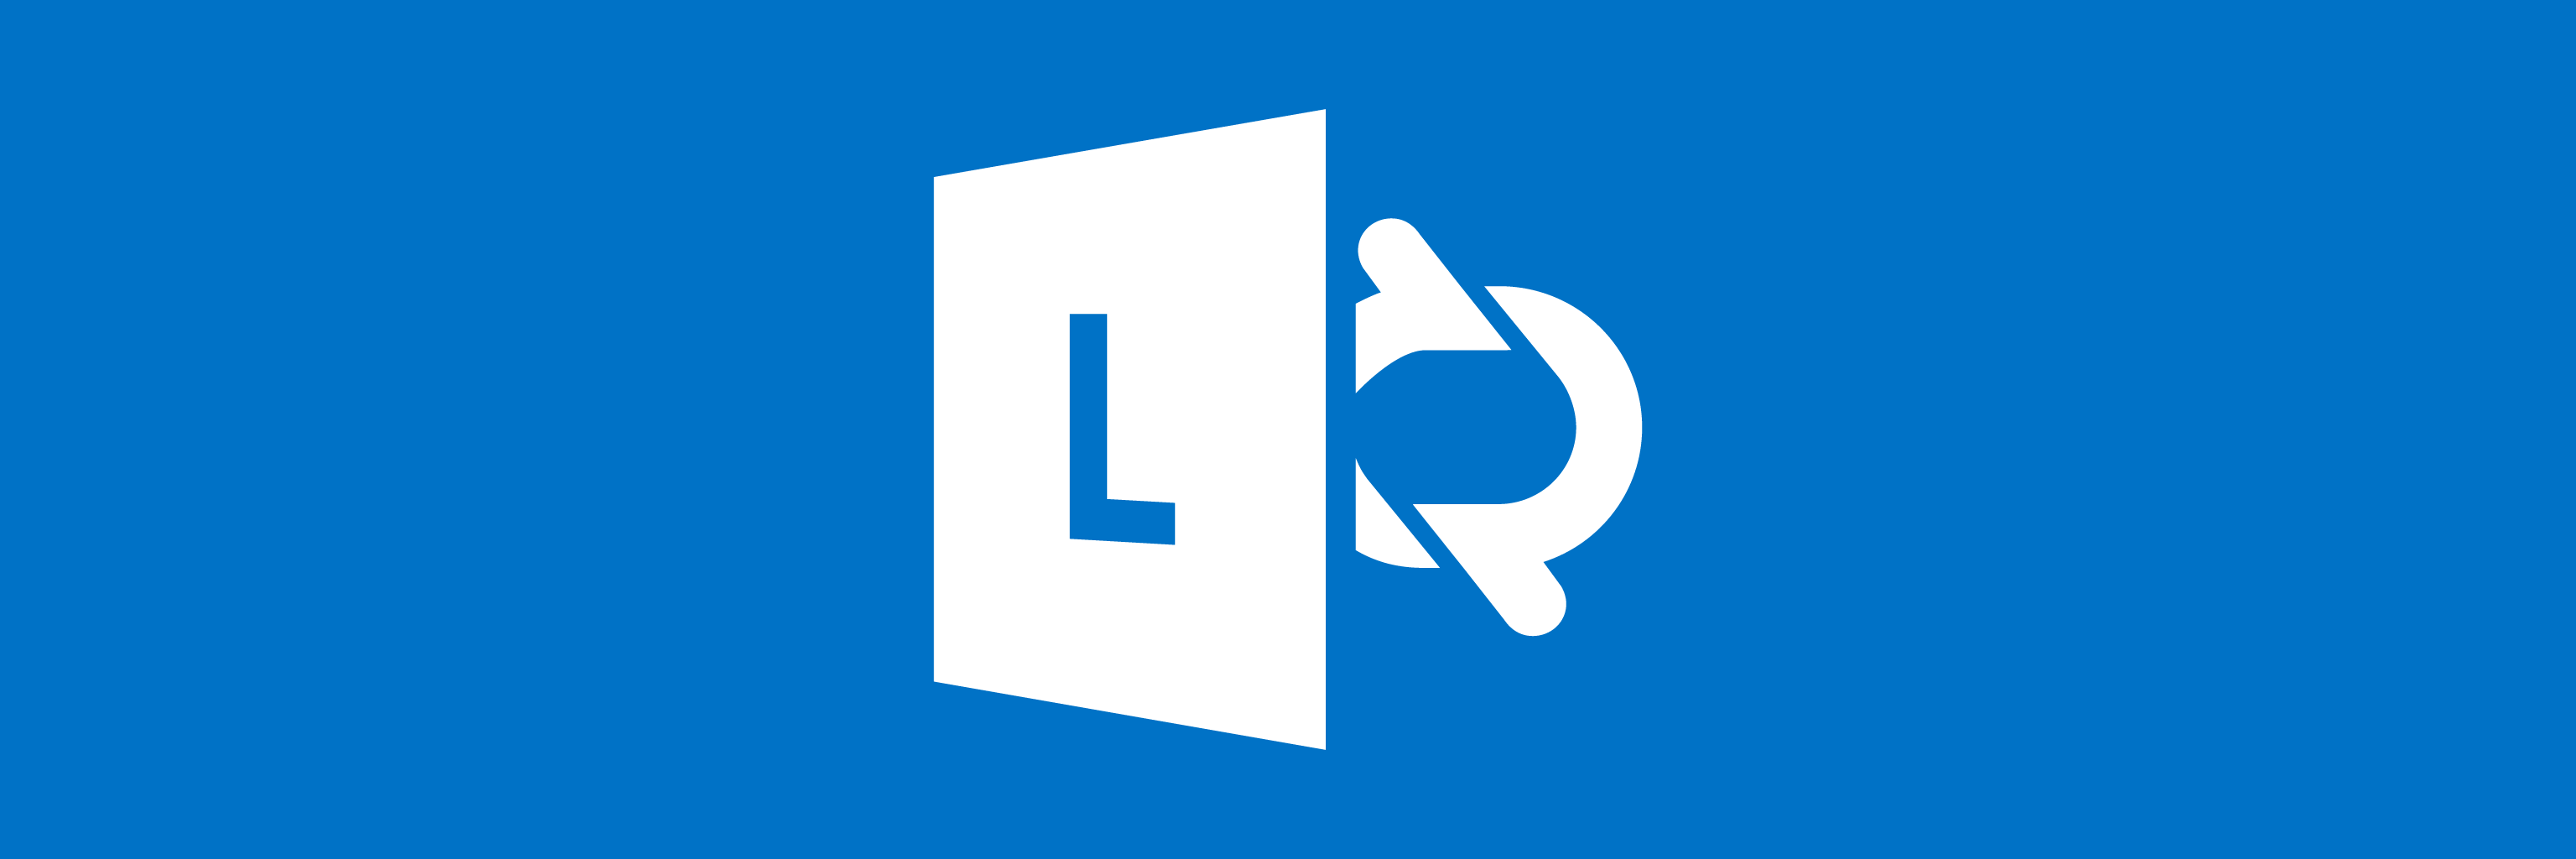 Microsoft Lync Logo - The War of the Worlds: Why Lync is set to disrupt the UC market